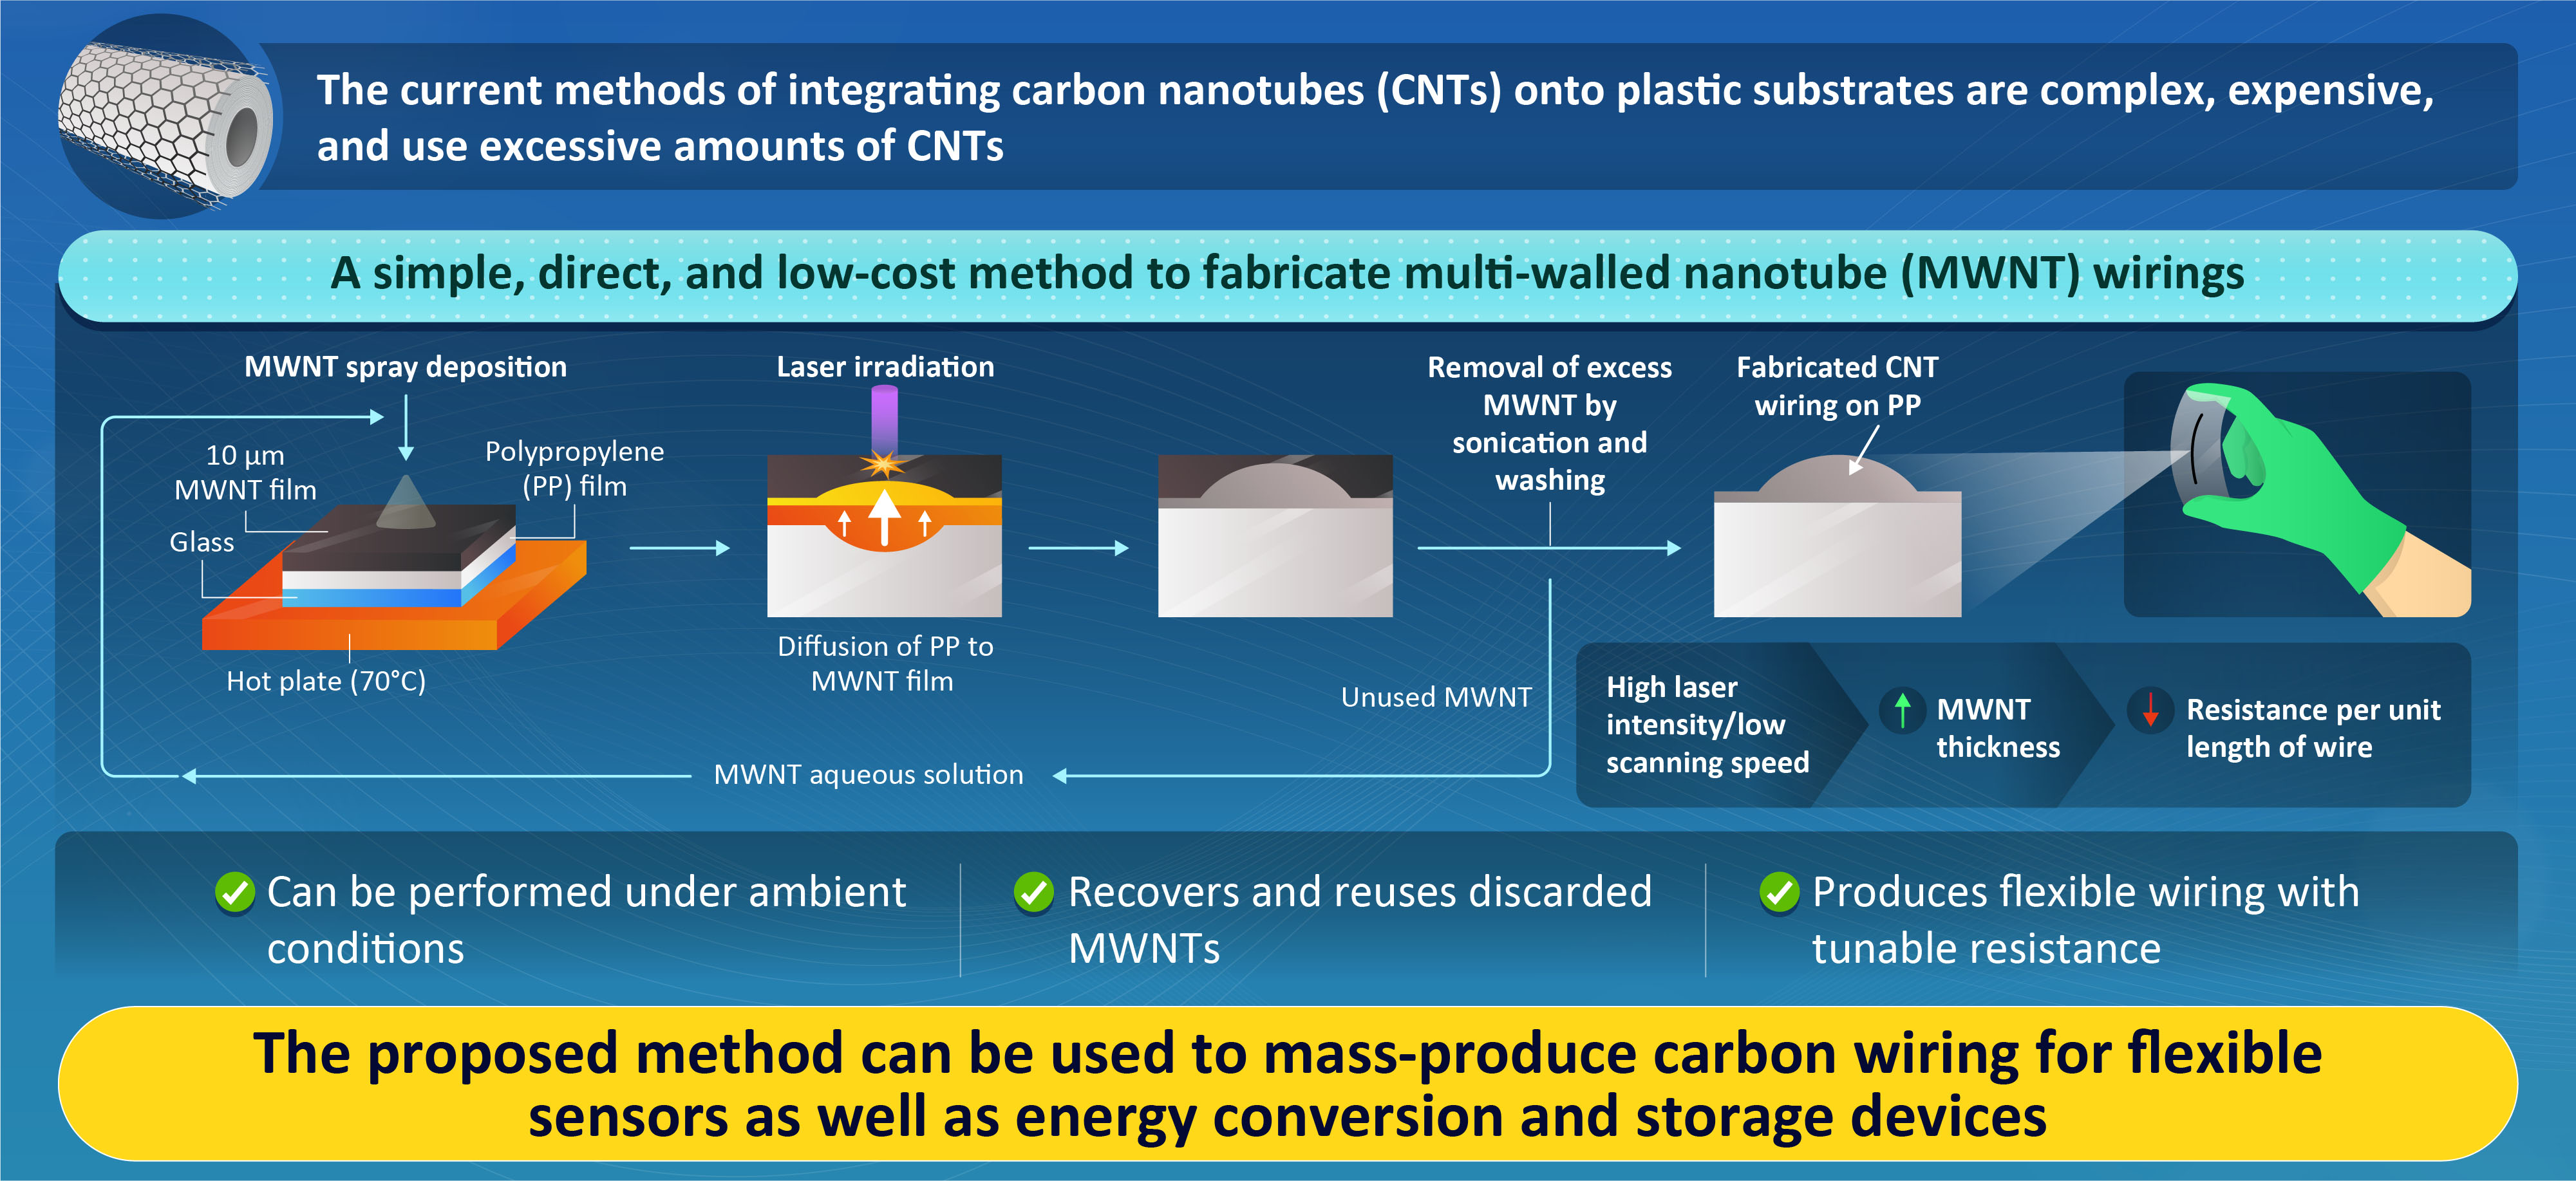 fficient, large-scale fabrication of carbon nanotube wiring on plastic films